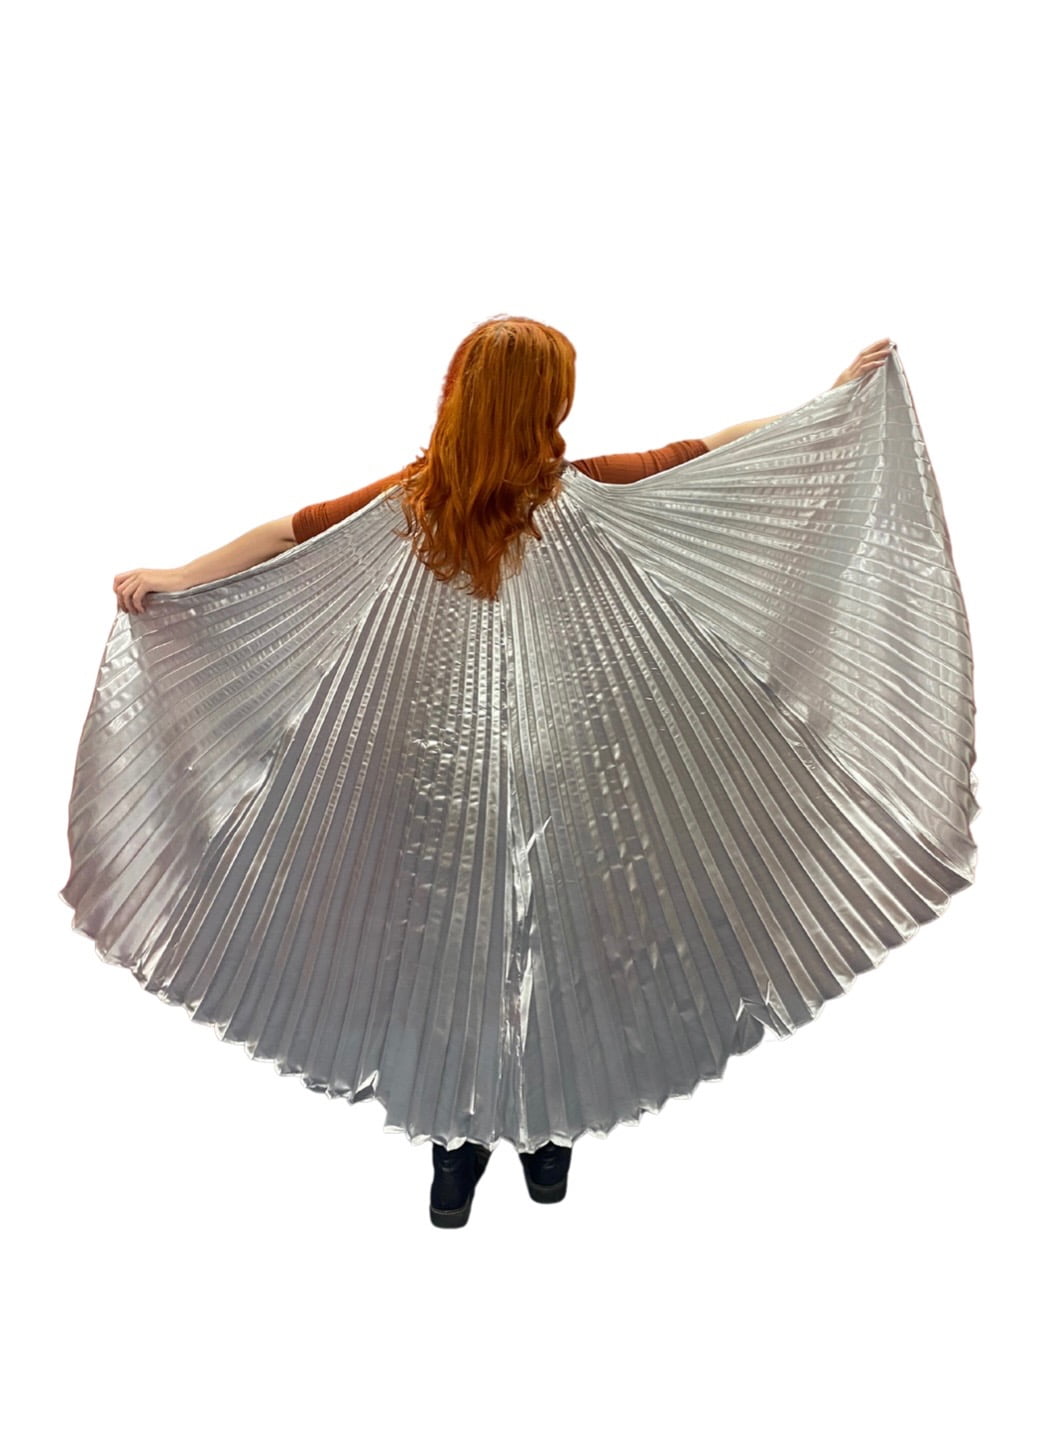 Featured image for “Silver Pleated Cape”